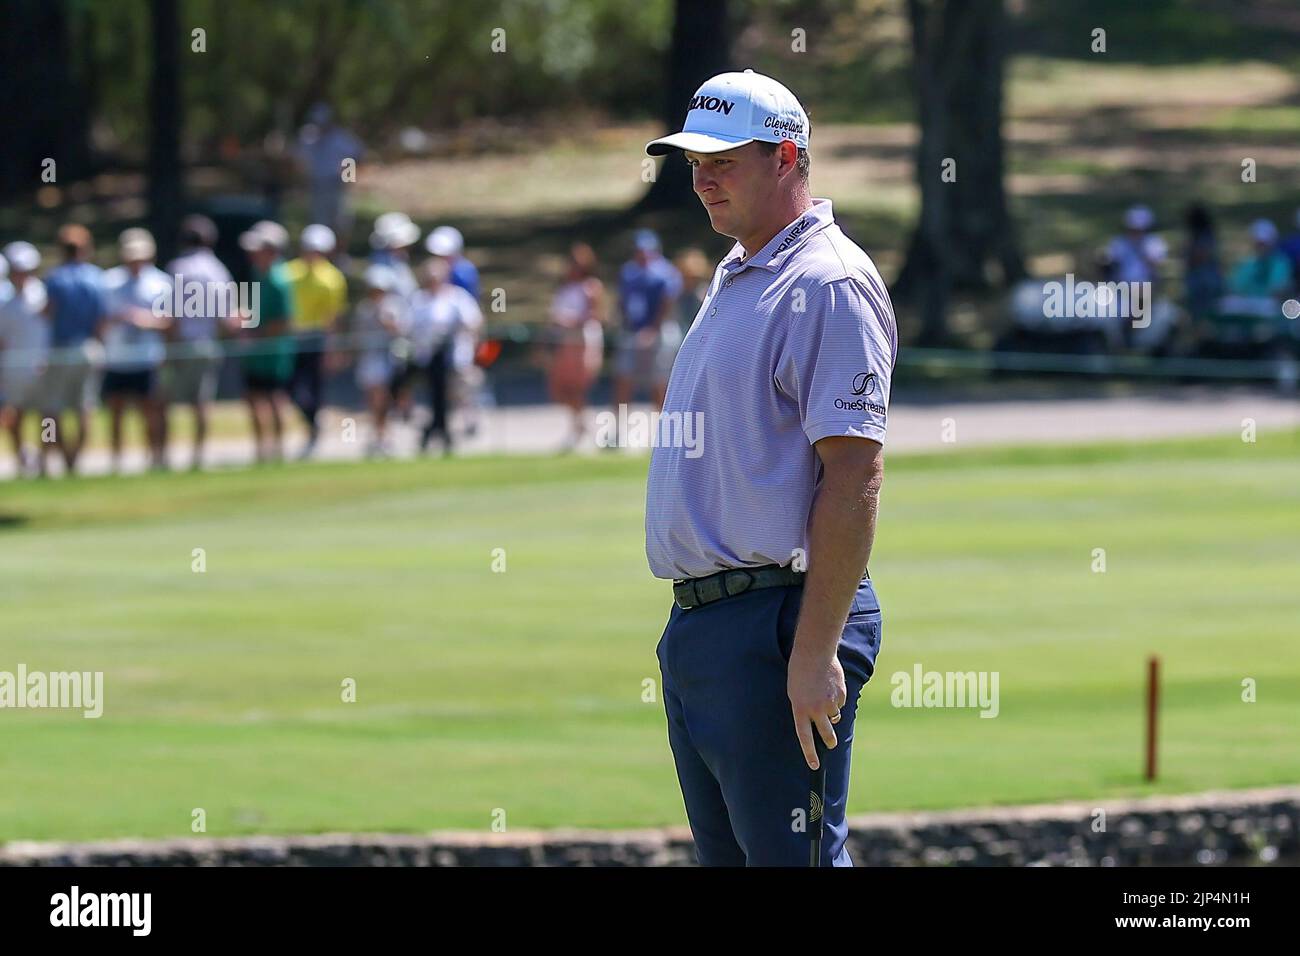 August 14, 2022: Sepp Straka on the 9th hole during the final round of the FedEx St. Jude Championship golf tournament at TPC Southwind in Memphis, TN. Gray Siegel/Cal Sport Media Stock Photo